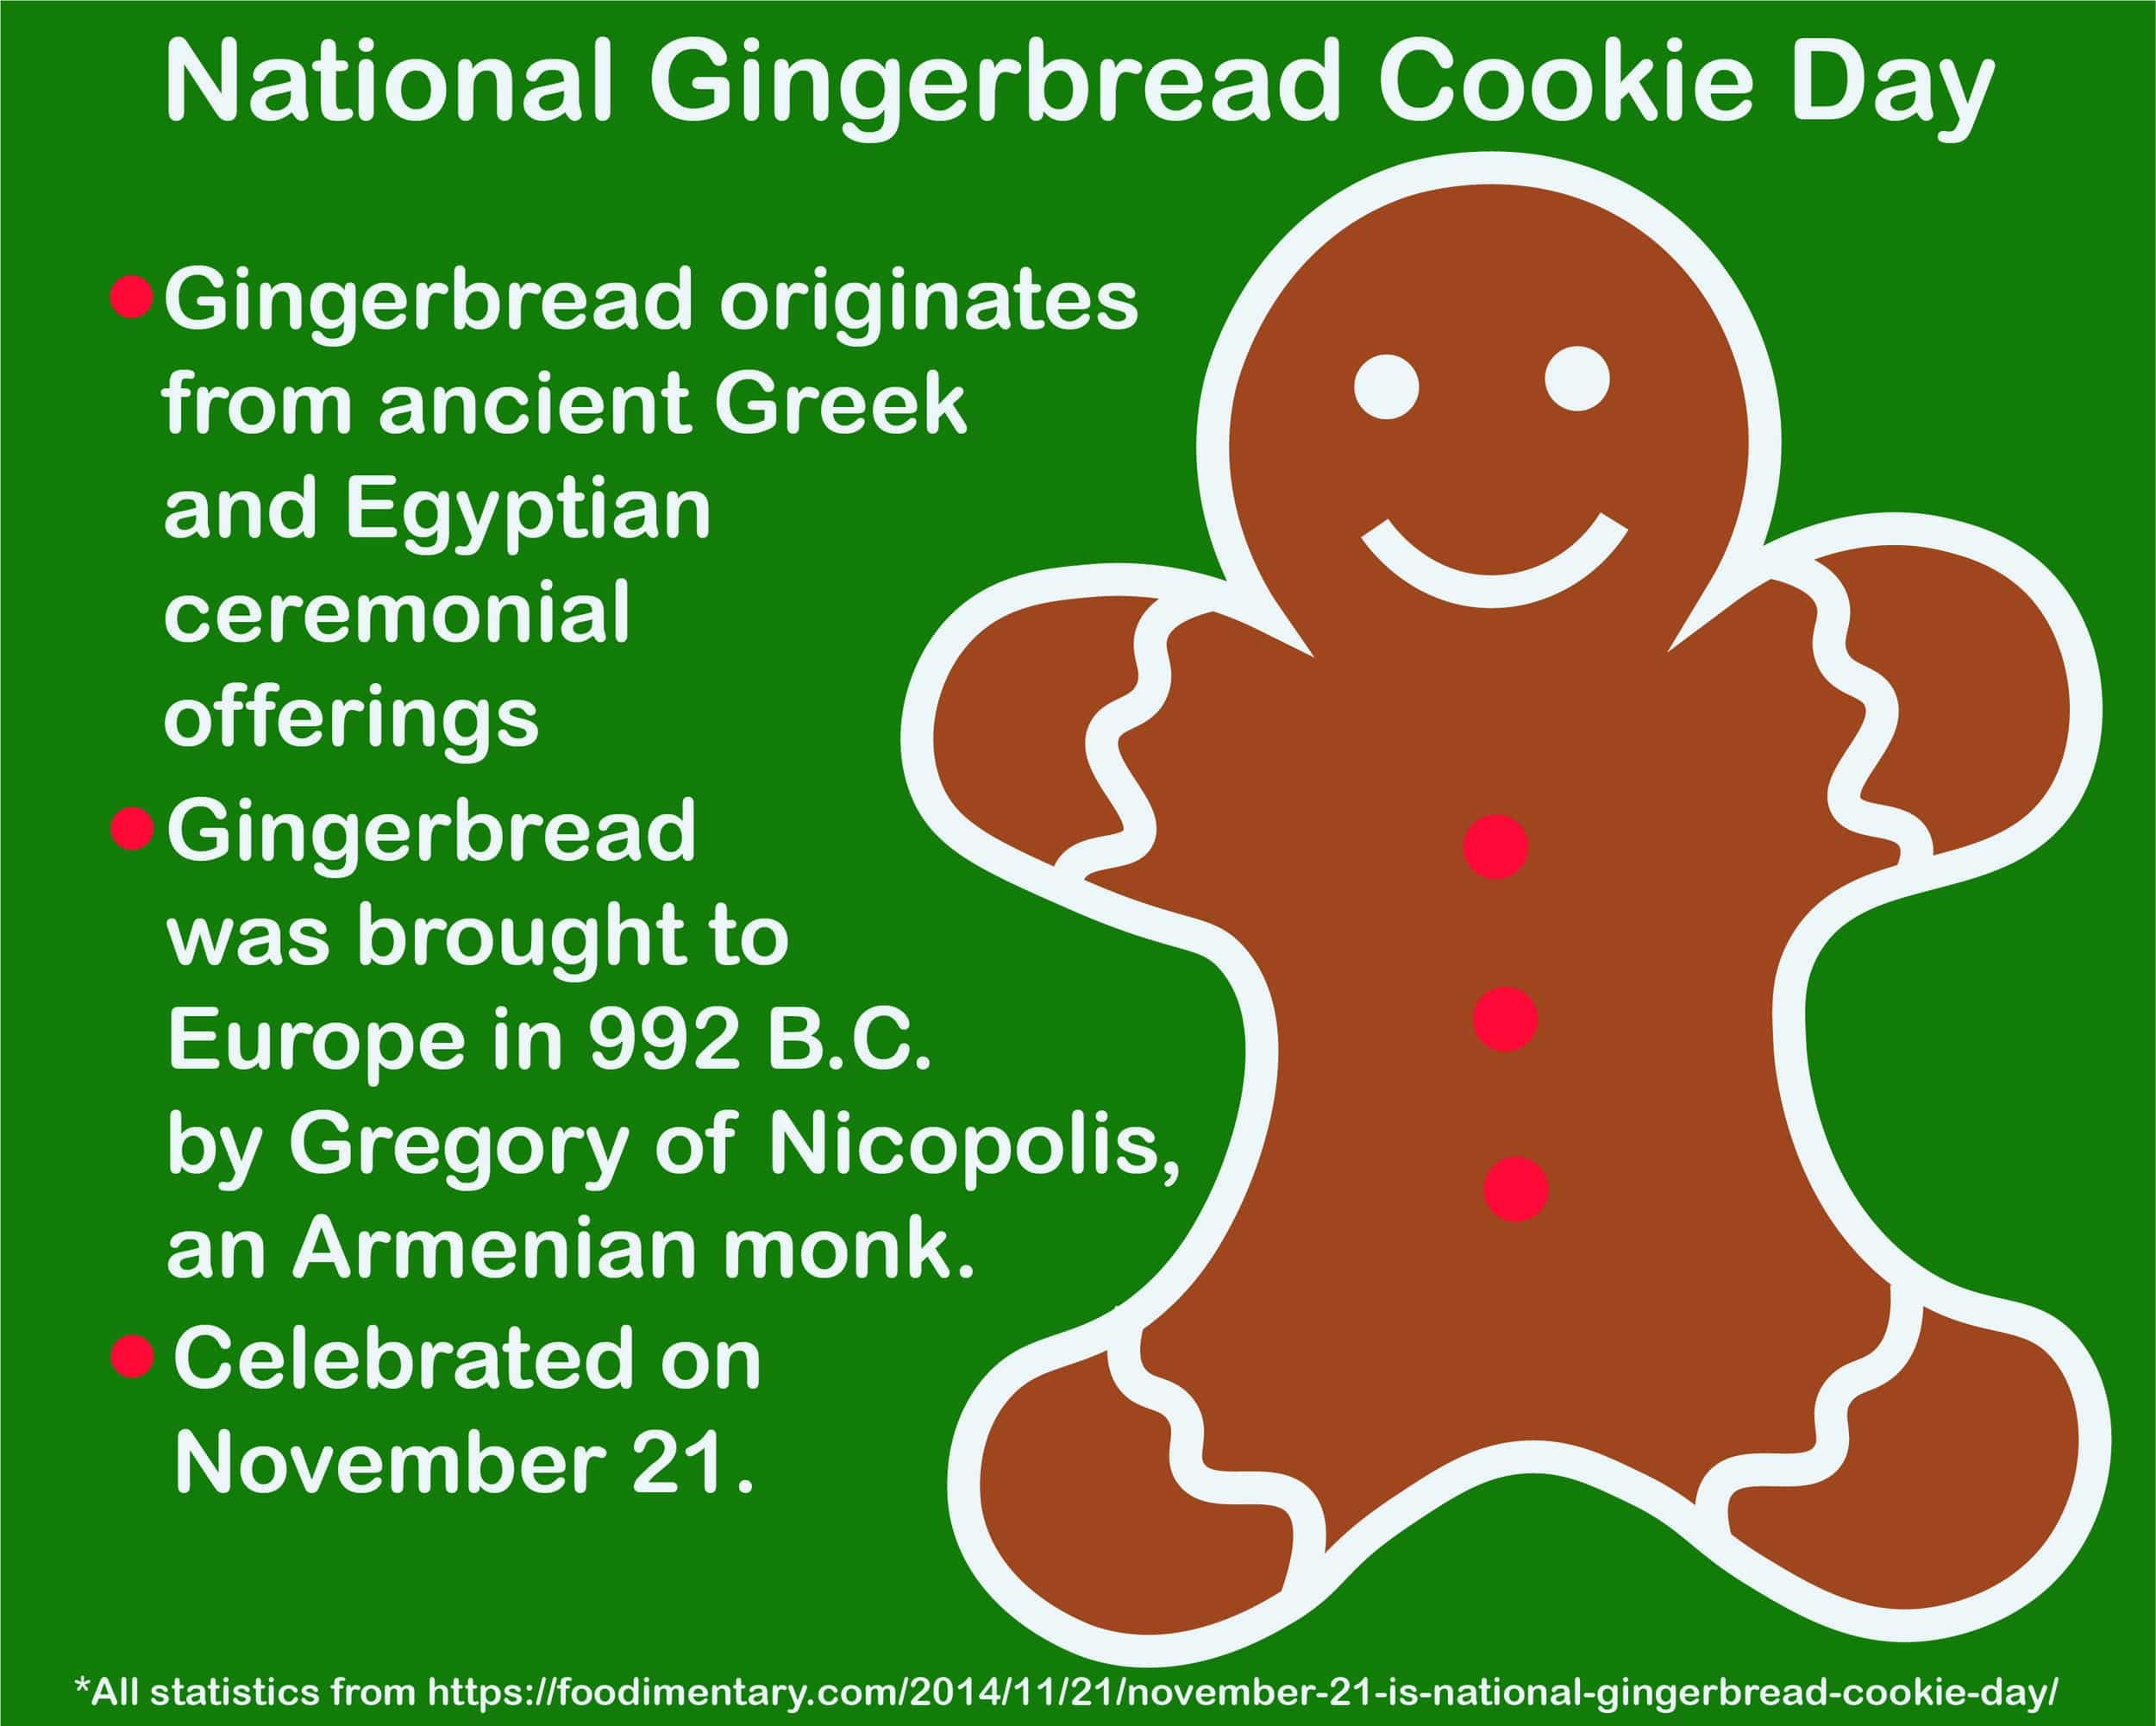 National gingerbread cookie day is November 21, 2019. How will you celebrate?